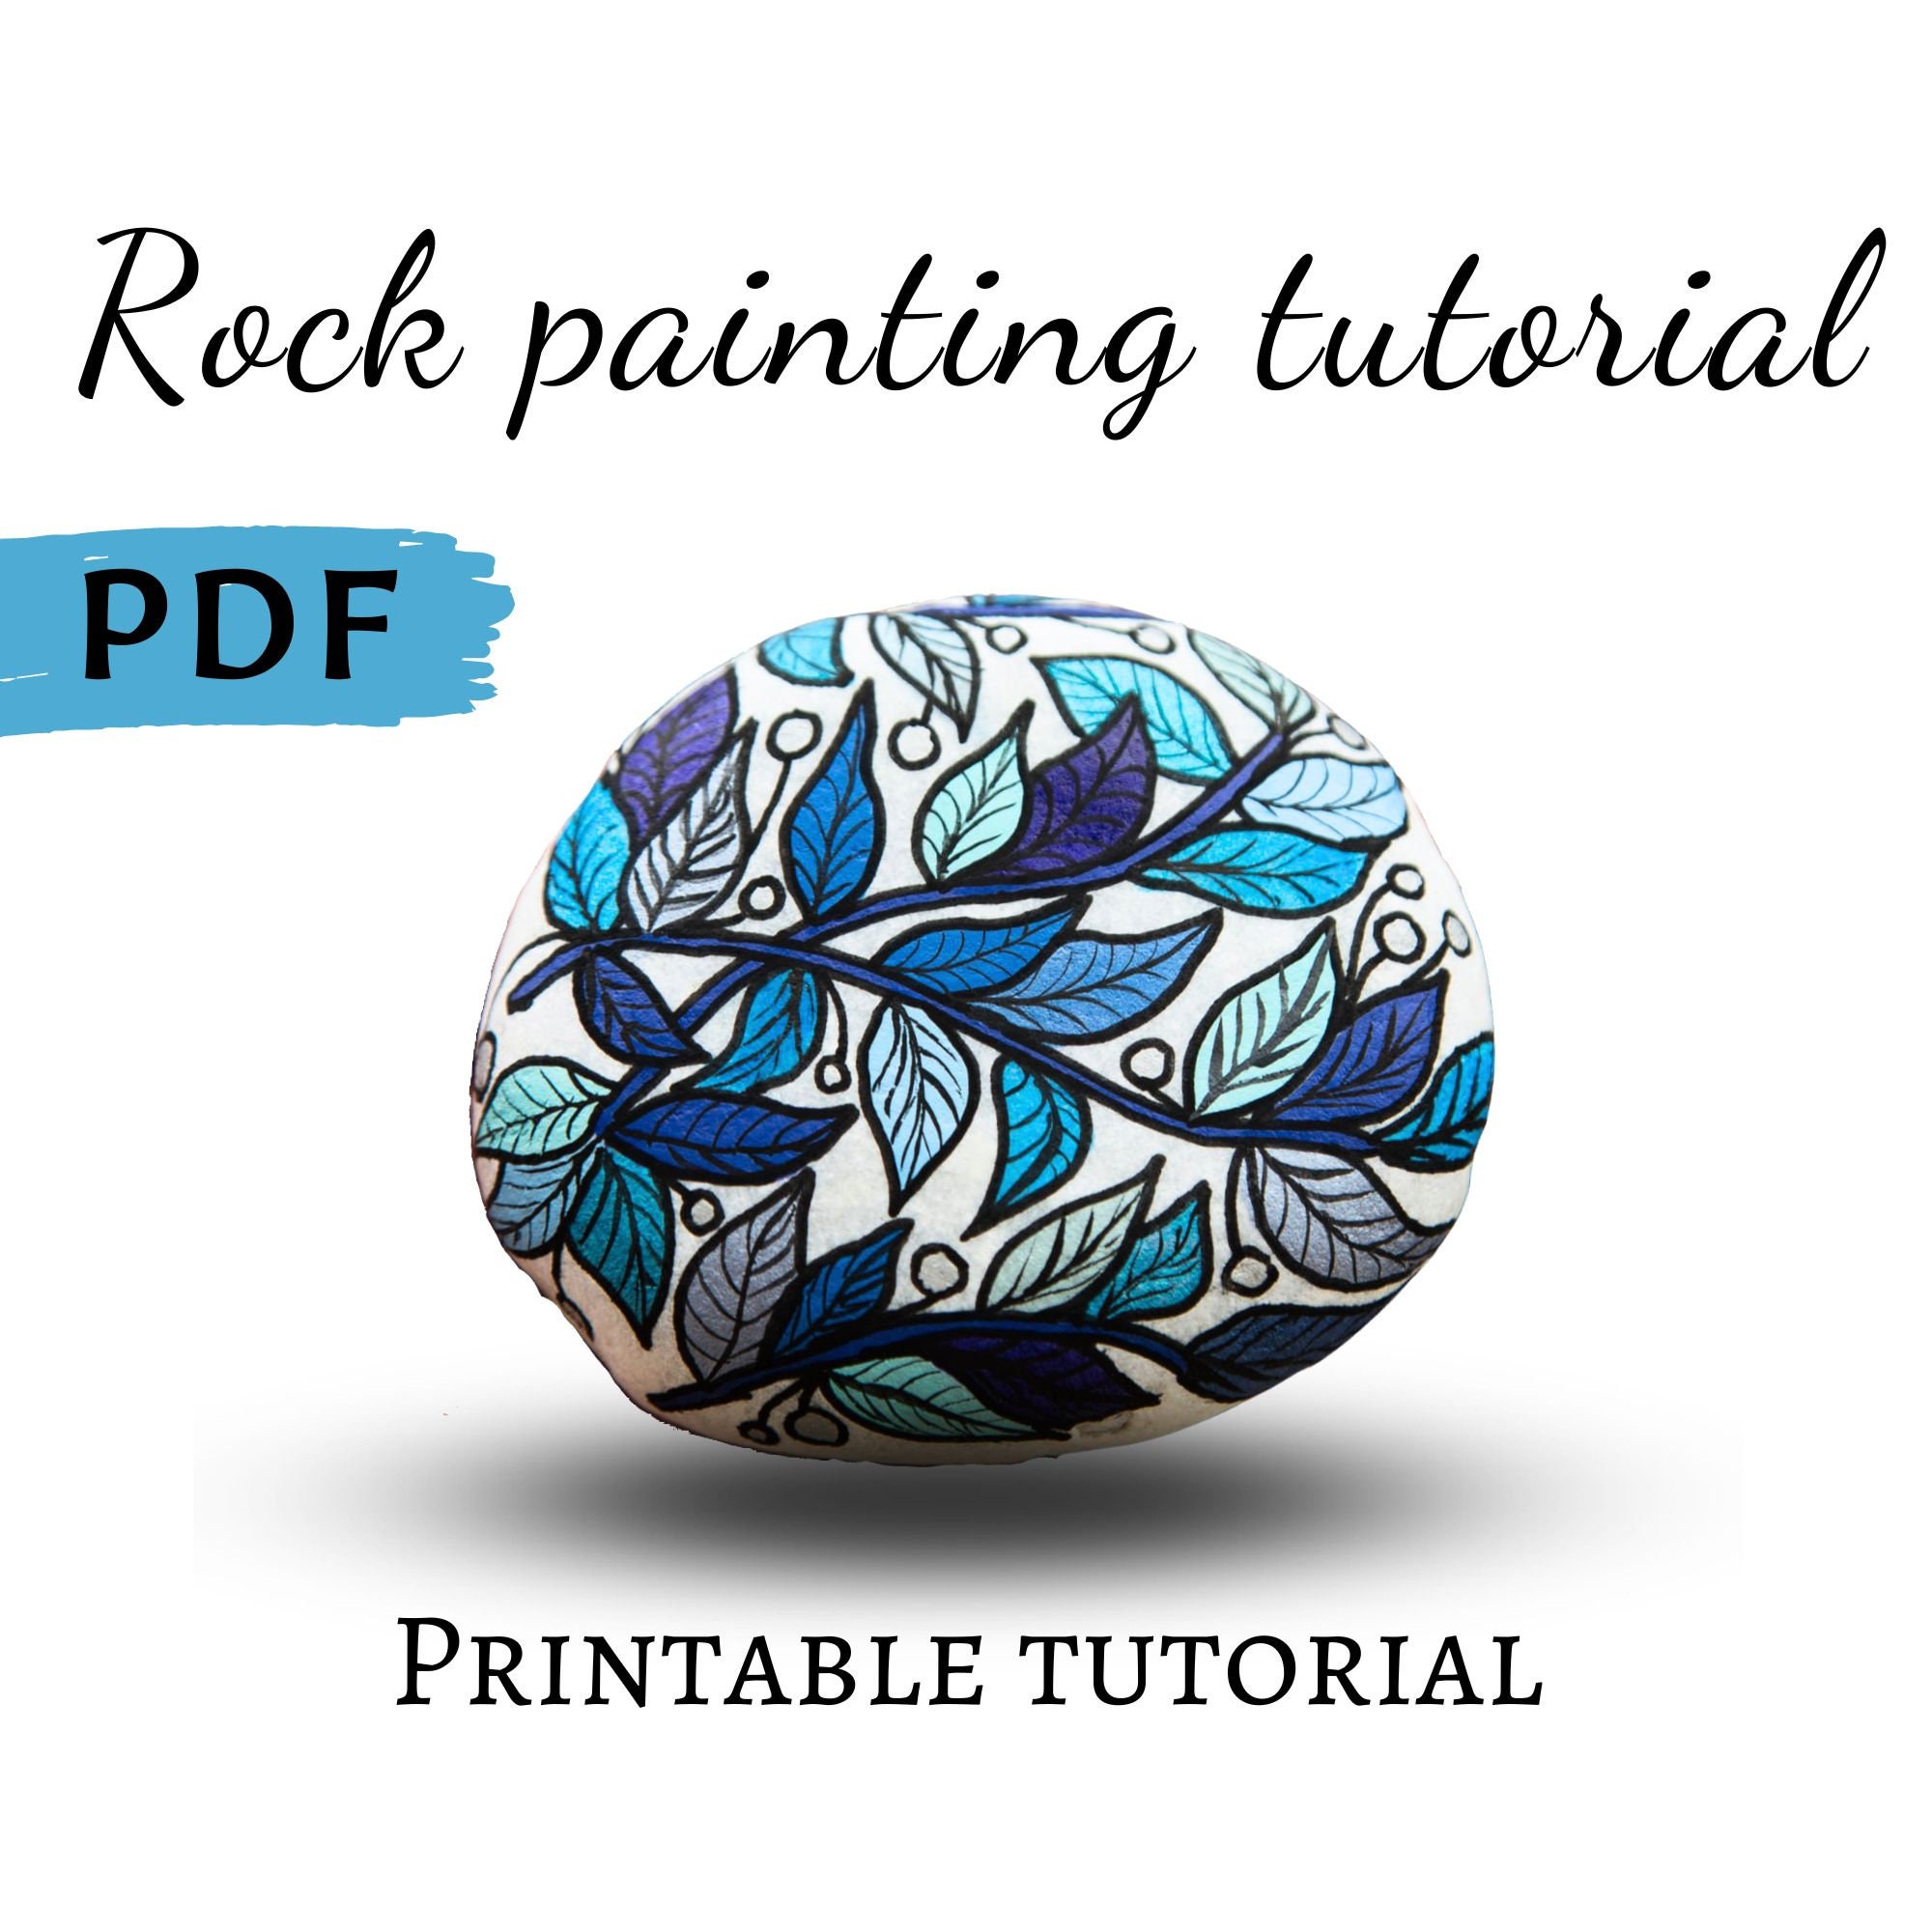 How to paint rocks with Artistro paint pens You can move mountains